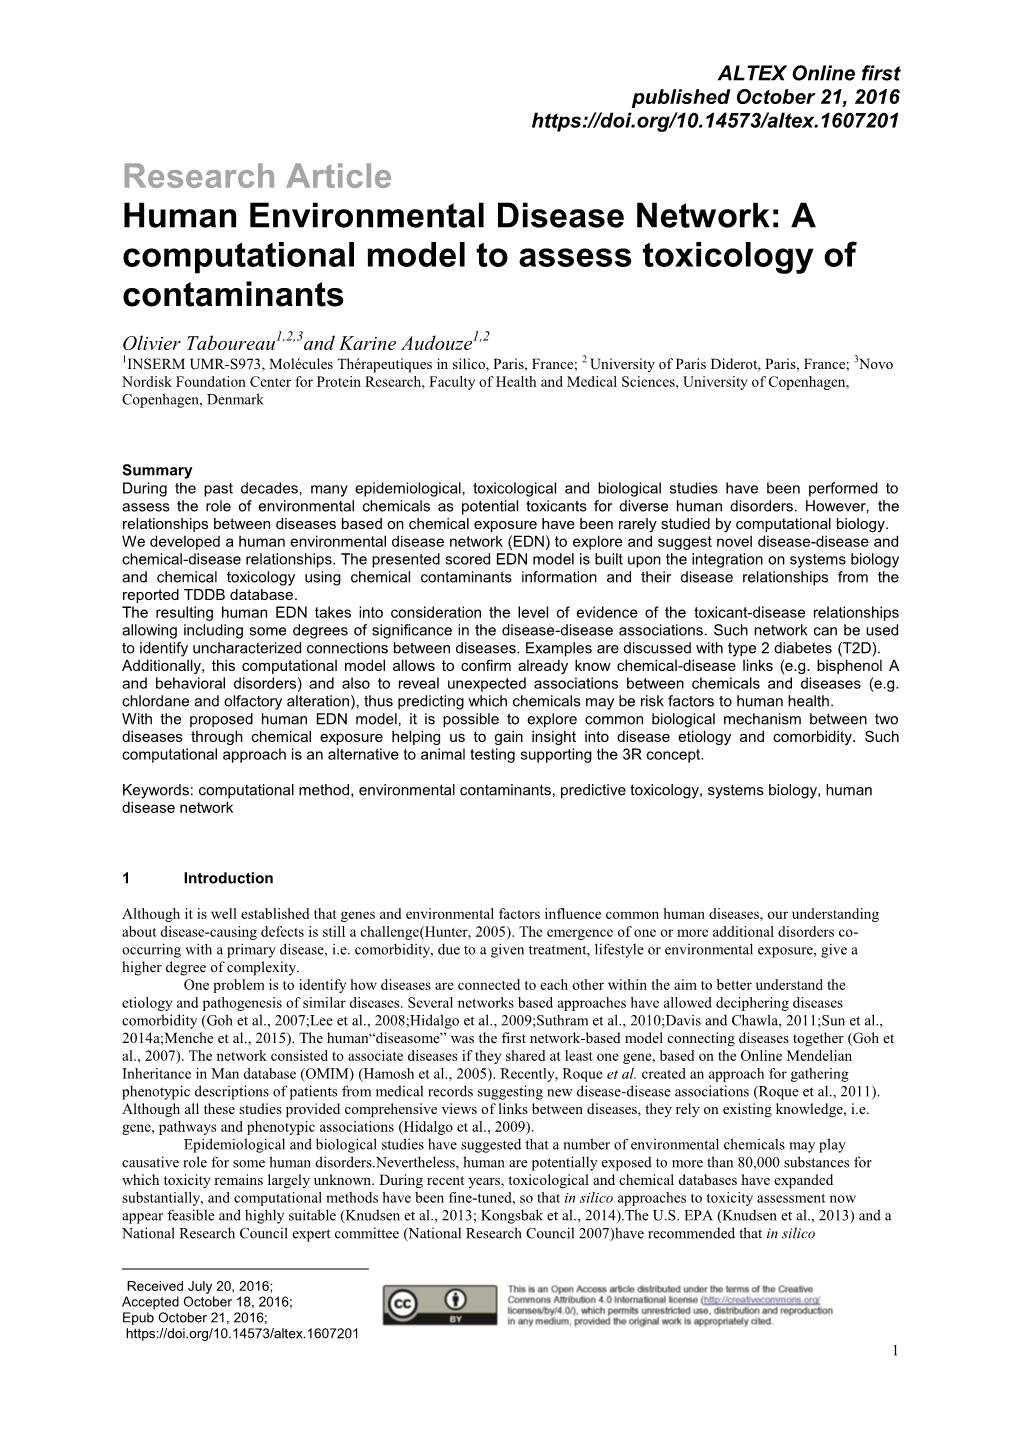 Research Article Human Environmental Disease Network: a Computational Model to Assess Toxicology of Contaminants1